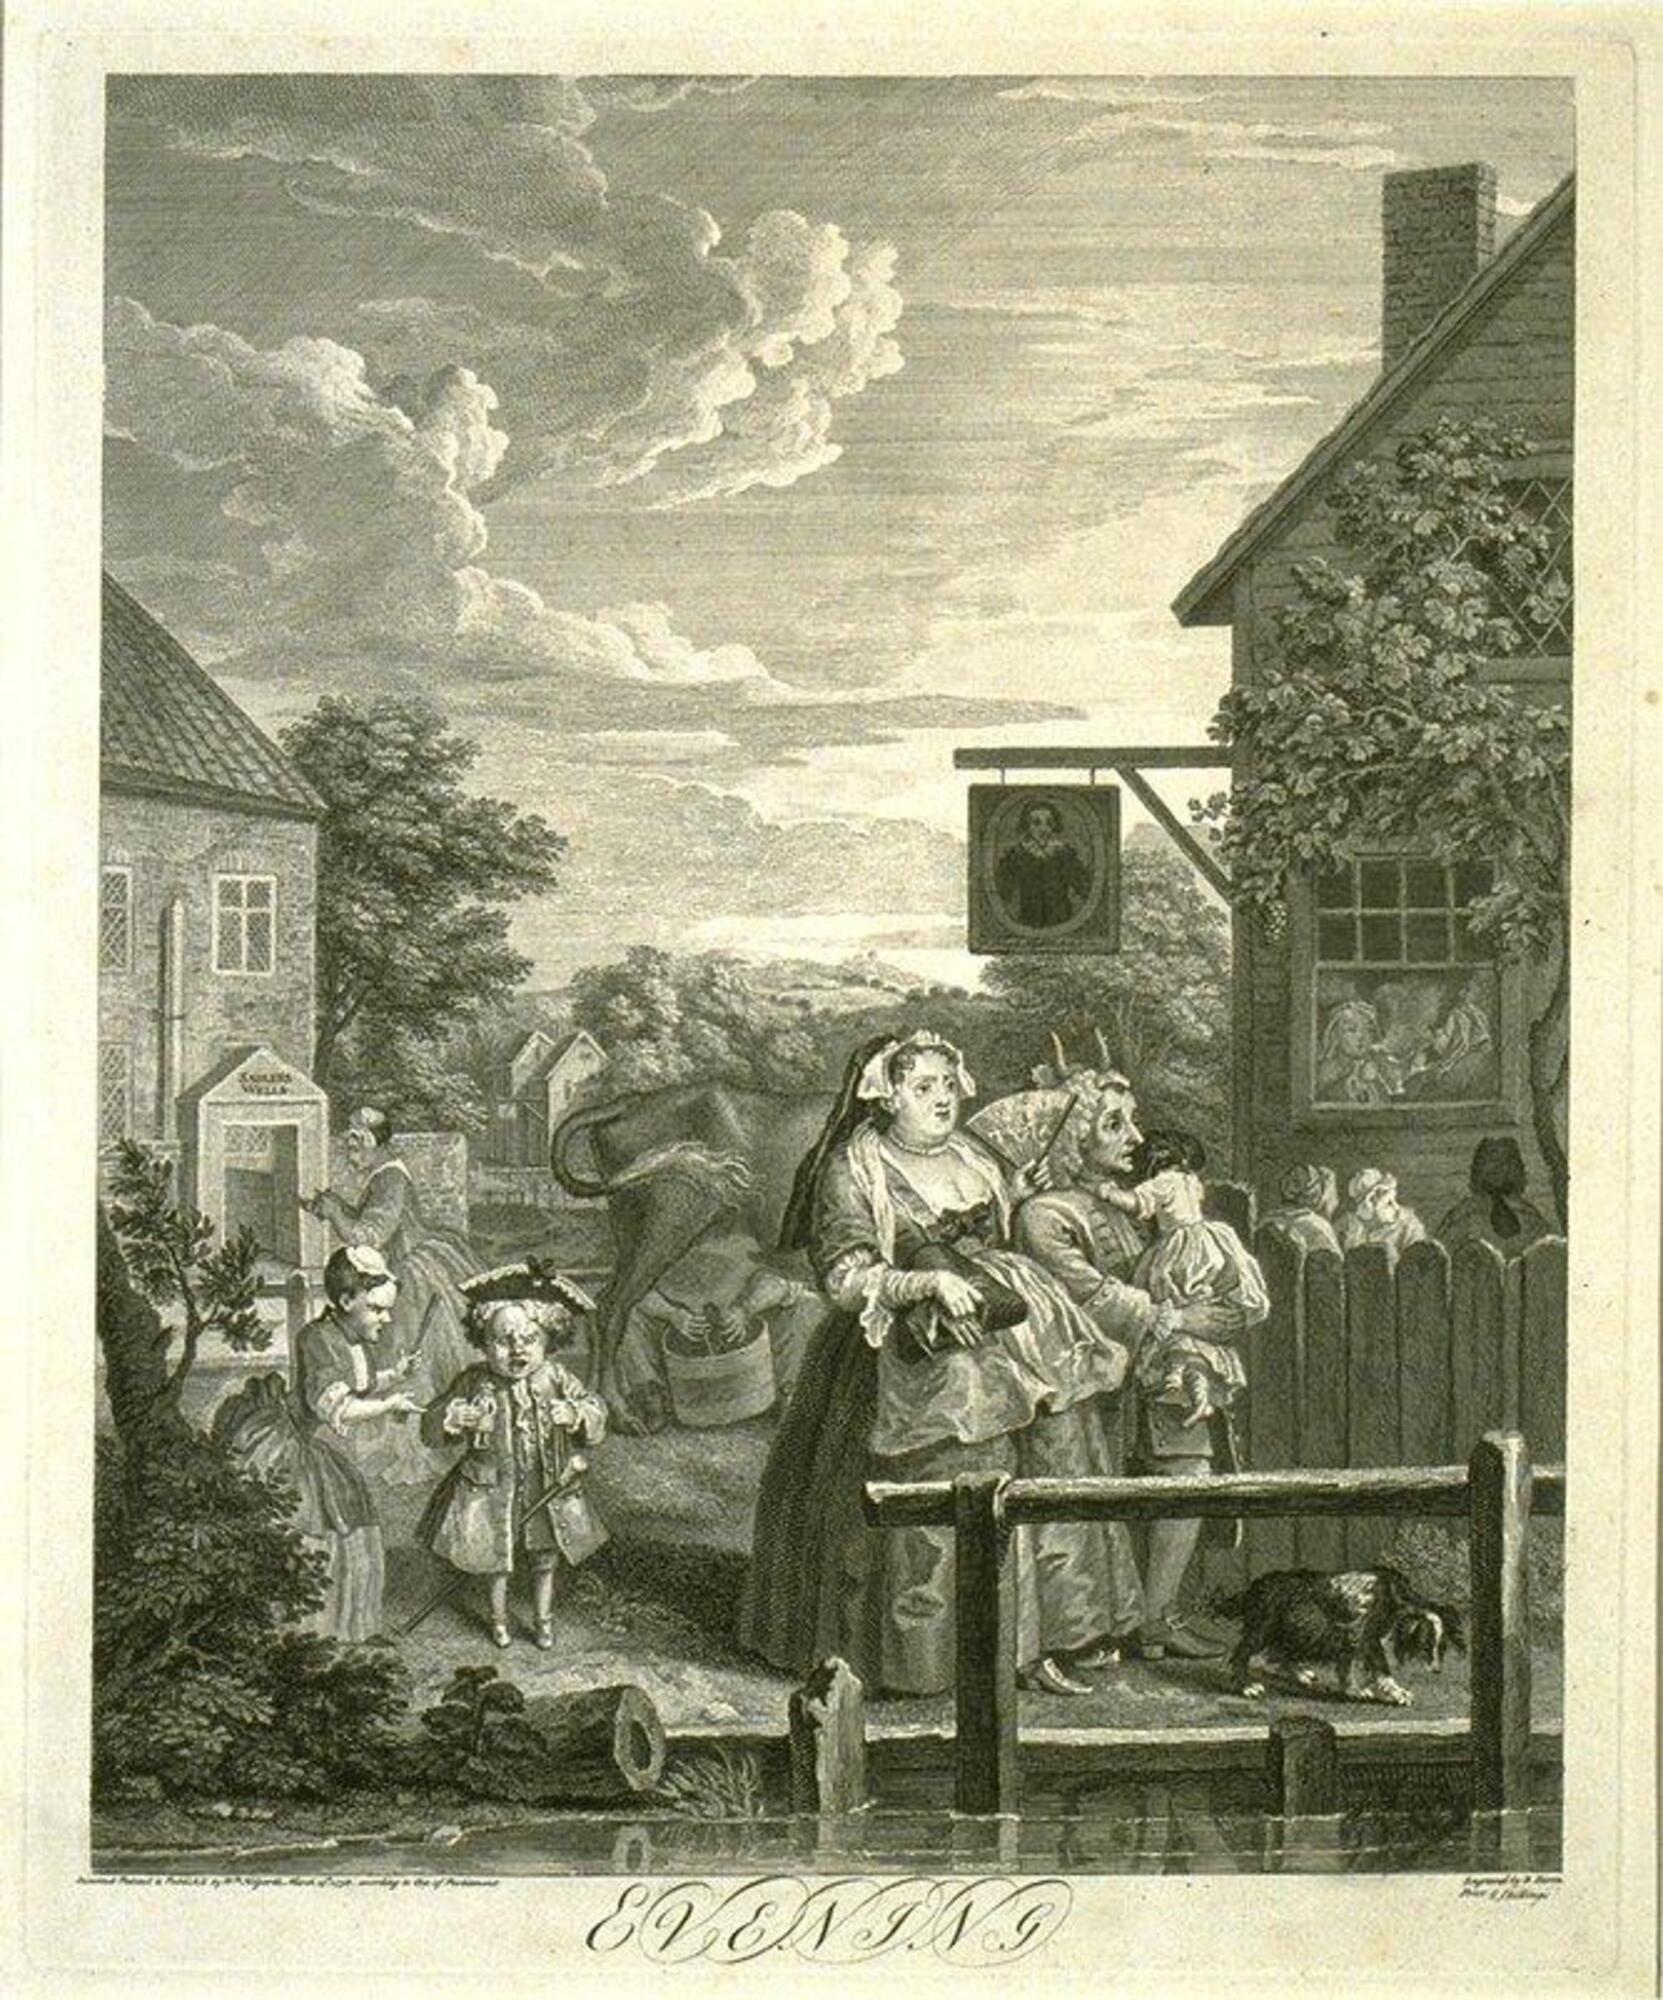 This print is vertically oriented with gray markings.  A cream border surrounds it and it has “EVENING” written below it.  The lower half of the print has a pastoral scene with several adults and children by a stream at the bottom of the print.  Behind them, someone milks a cow.  The upper half shows the tops of buildings and rolling hills.  A sunset is taking place with dramatic clouds.<br />